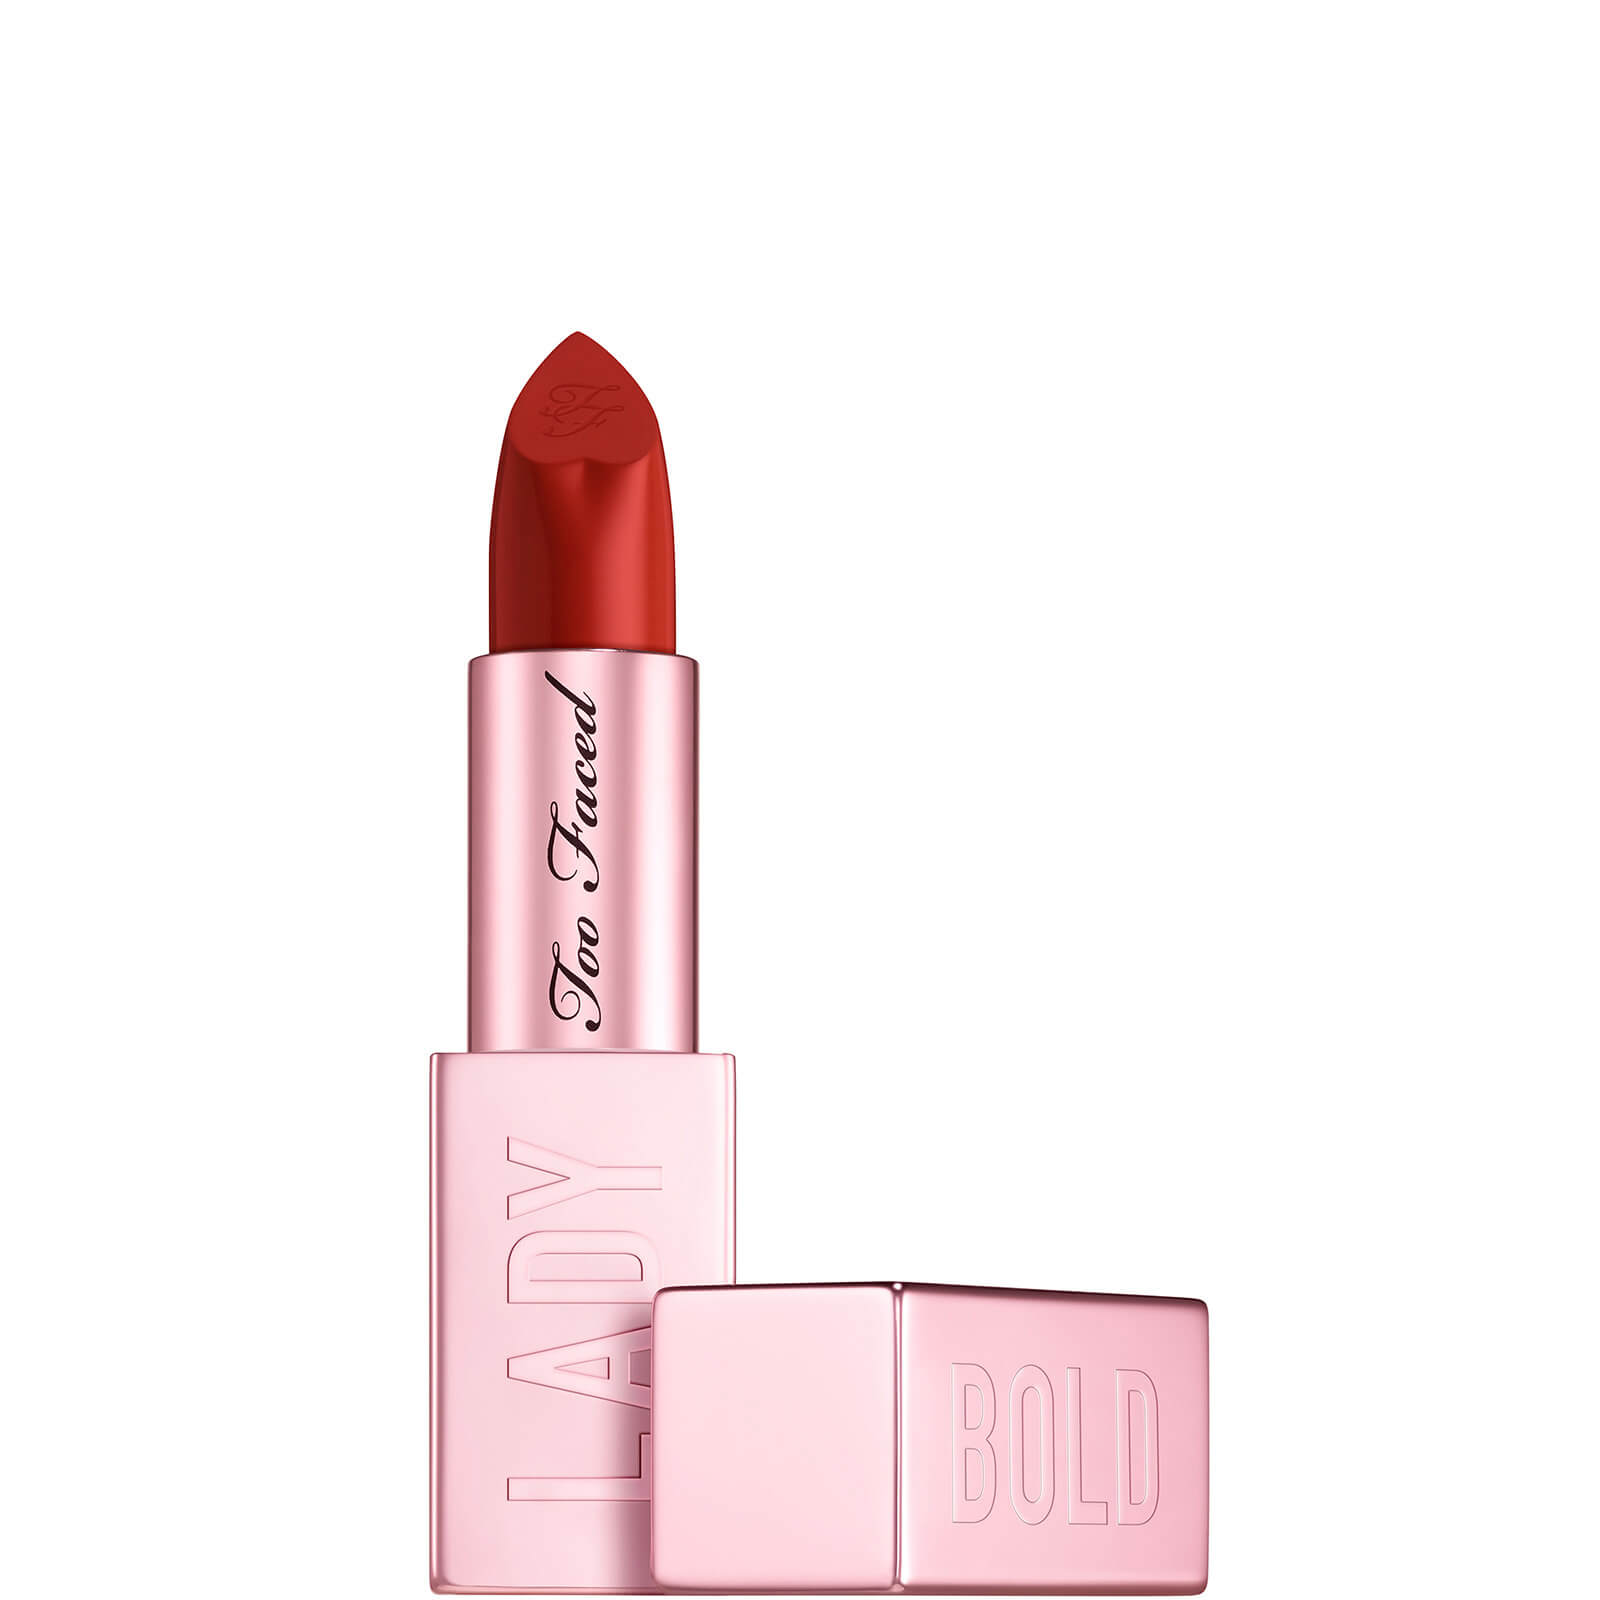 Too Faced Lady Bold Em-Power Pigment Lipstick 4g (Various Shades) - Be True To You